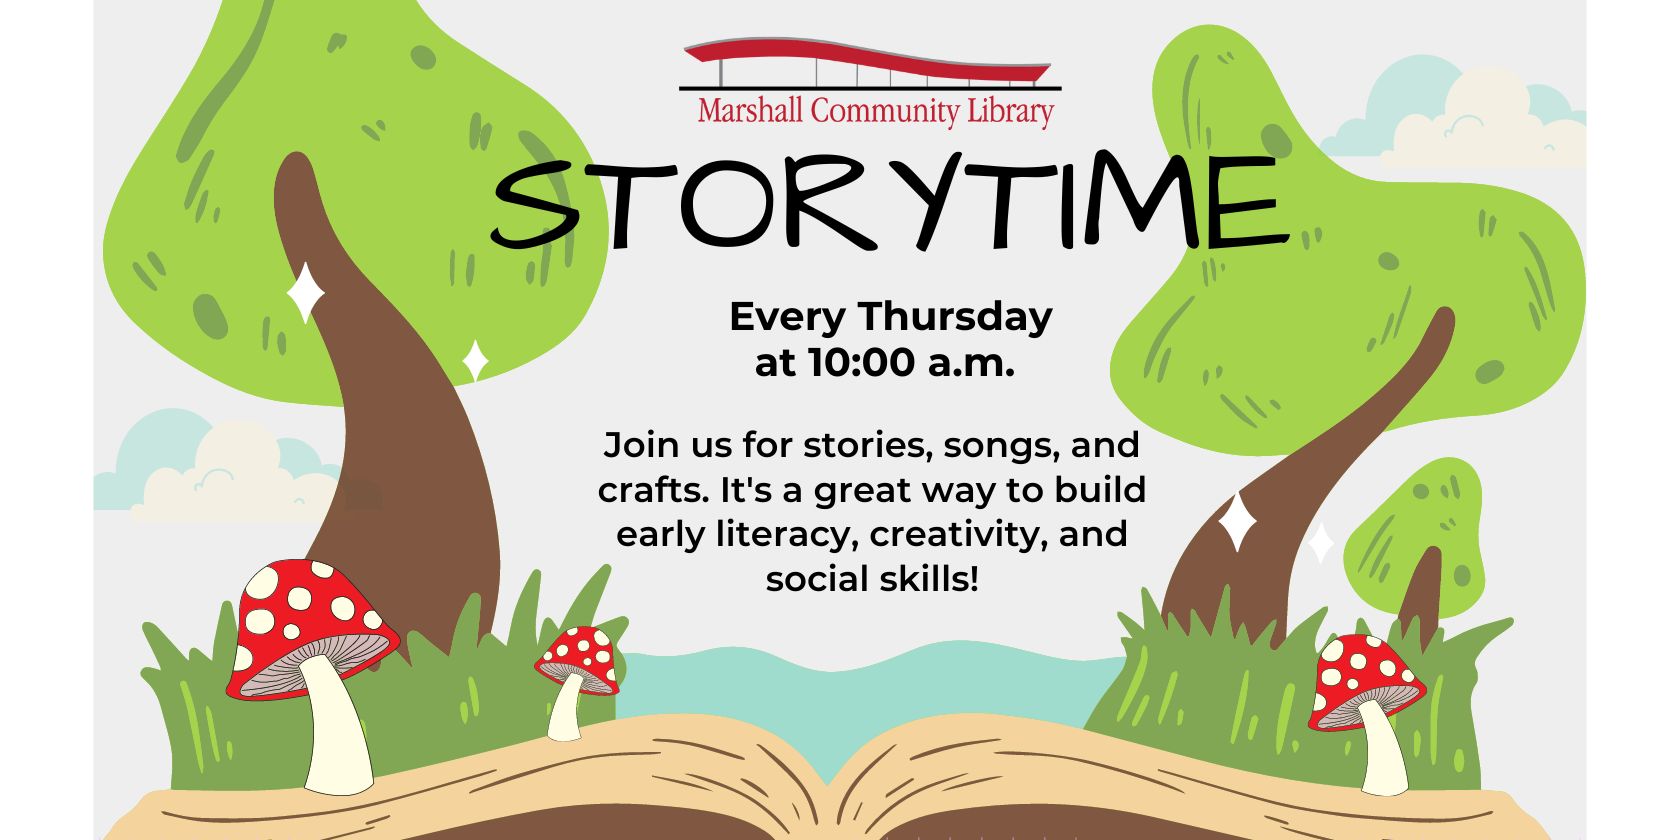 Storytime every Thursday at 10:00 a.m.